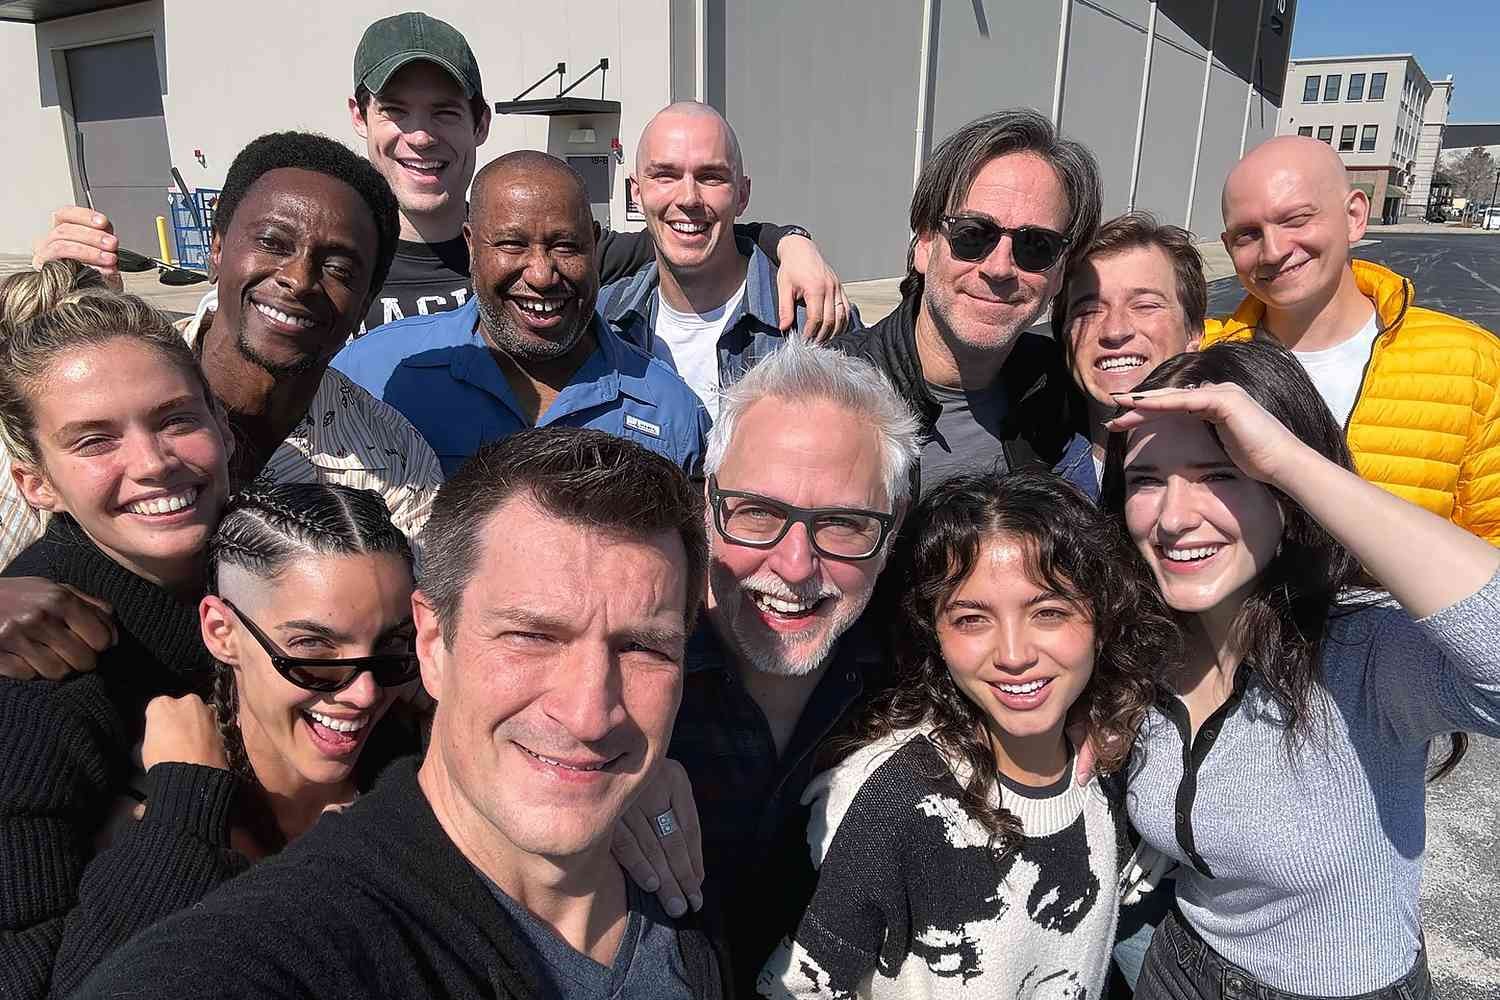 James Gunn along with the cast of the upcoming SUPERMAN film